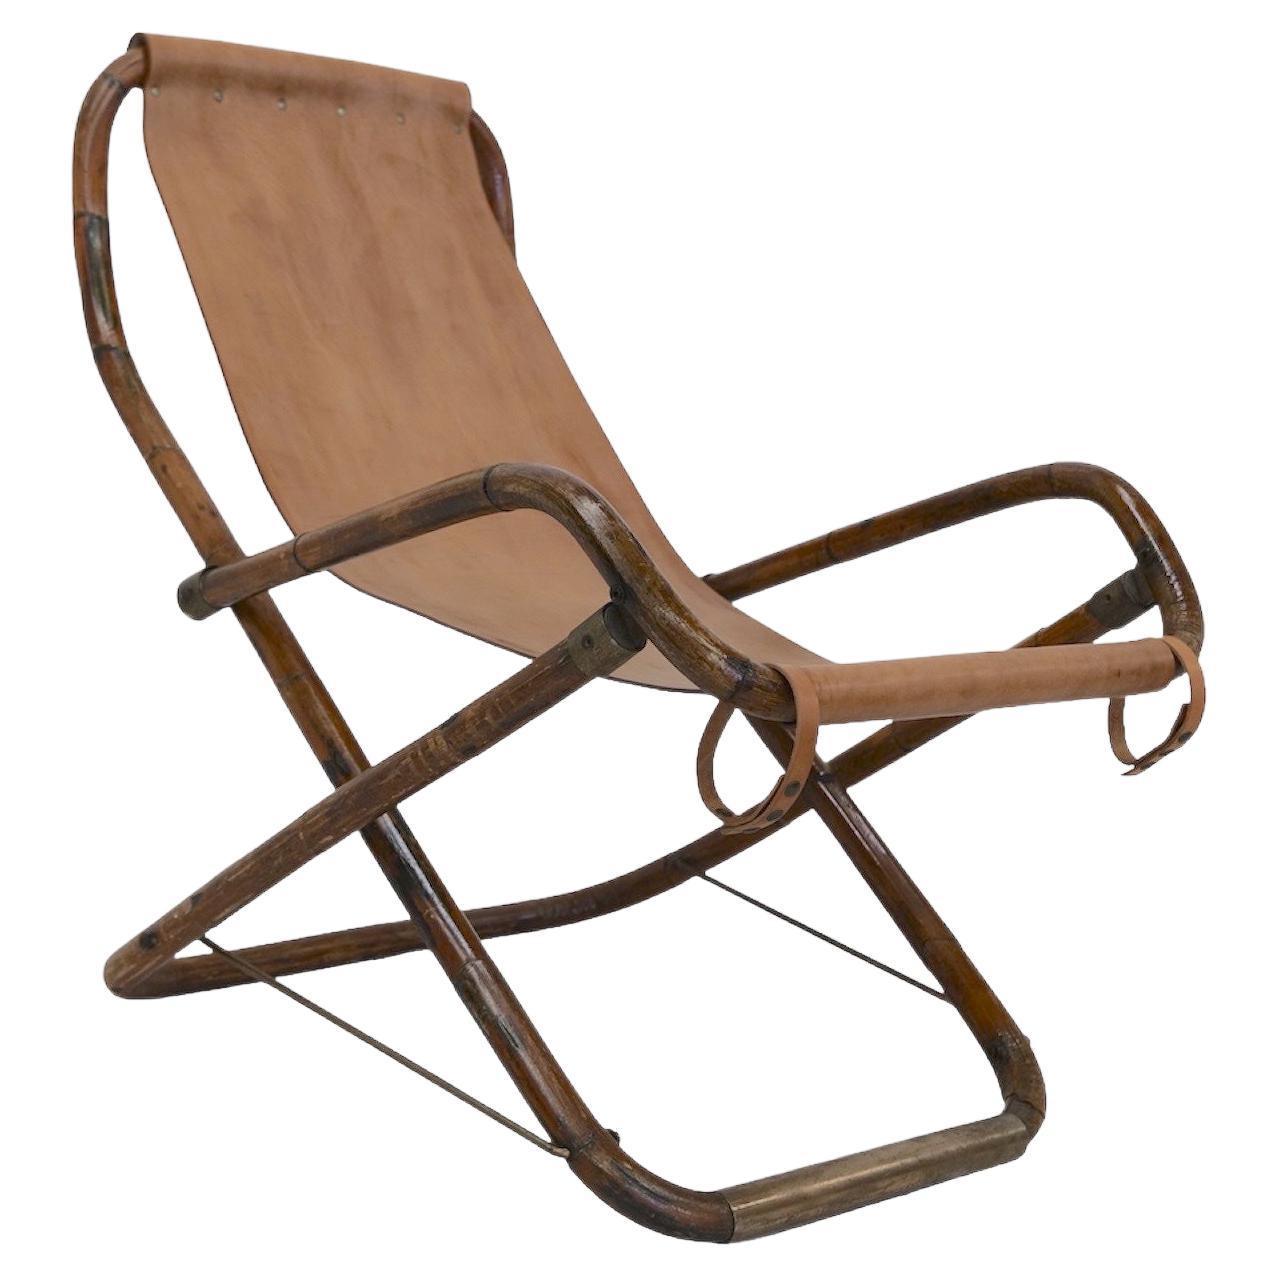 Vintage Italian Leather and Wood Rocking Chair, 1960s